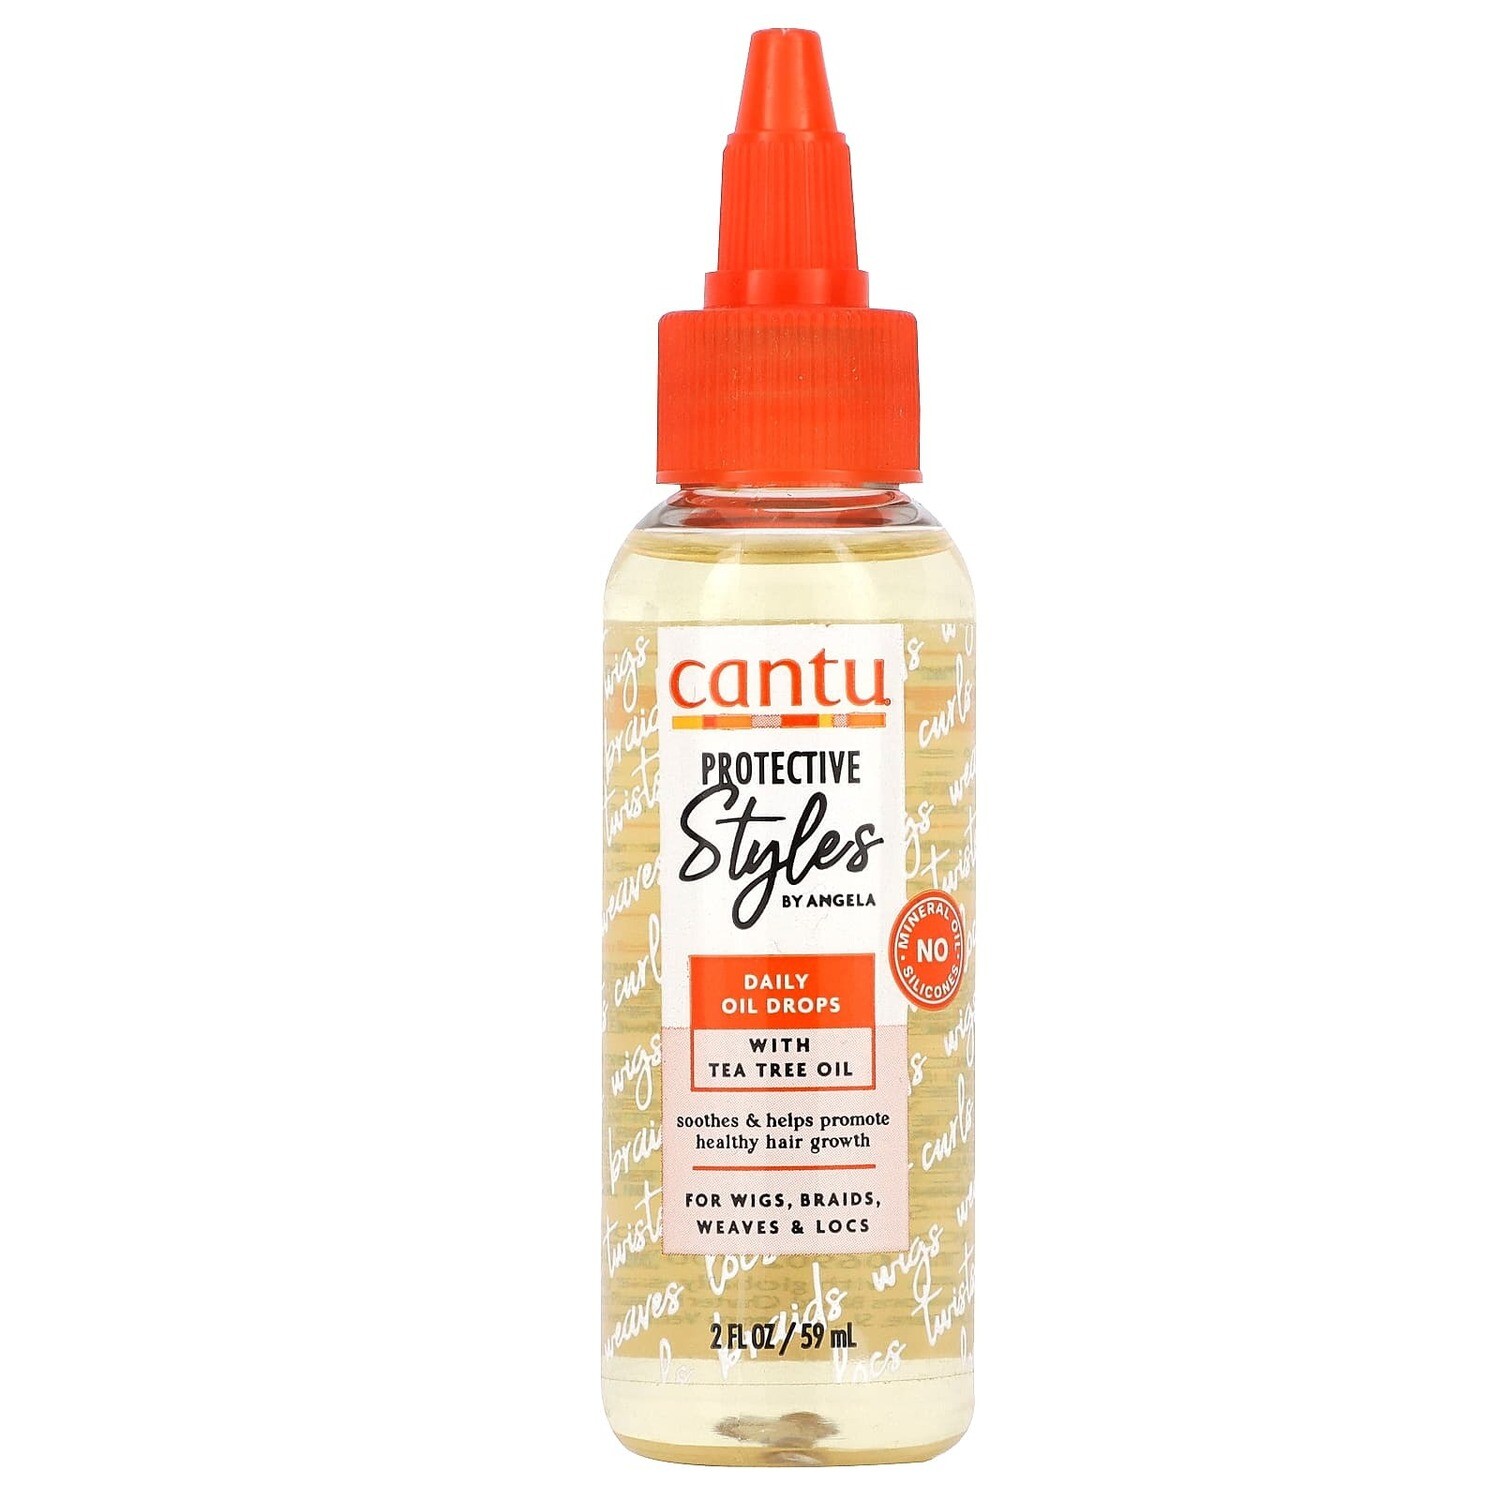 Cantu Protective Styles by Angela Daily Oil Drops 2oz